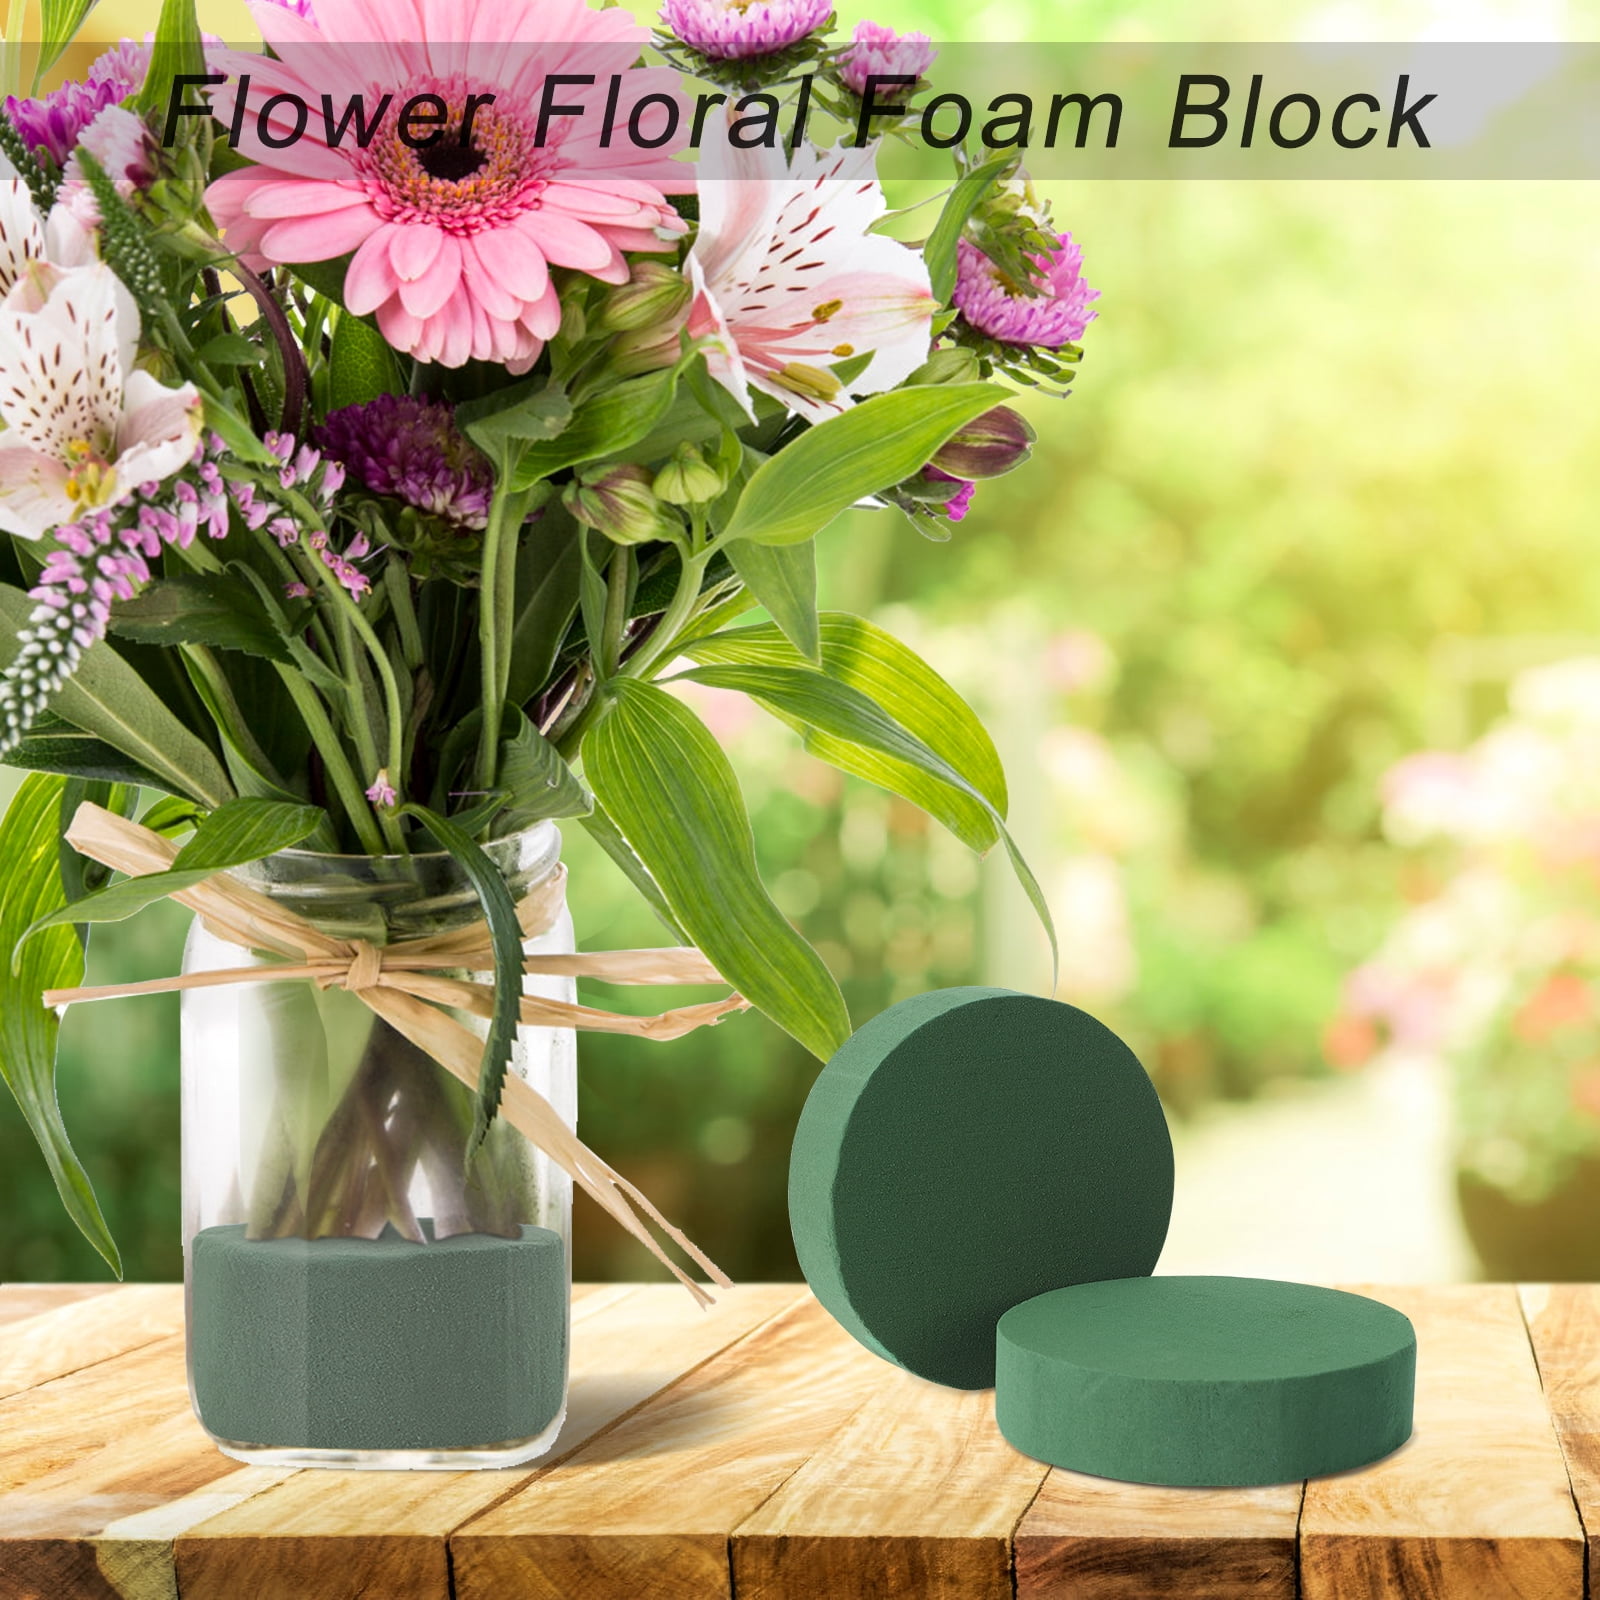 Bomutovy 6 Pack Round Floral Foam Blocks, 3.15'' Dry Floral Foam for  Artificial Flowers, Craft Project, Wedding Aisle Flowers, Arty Decoration 